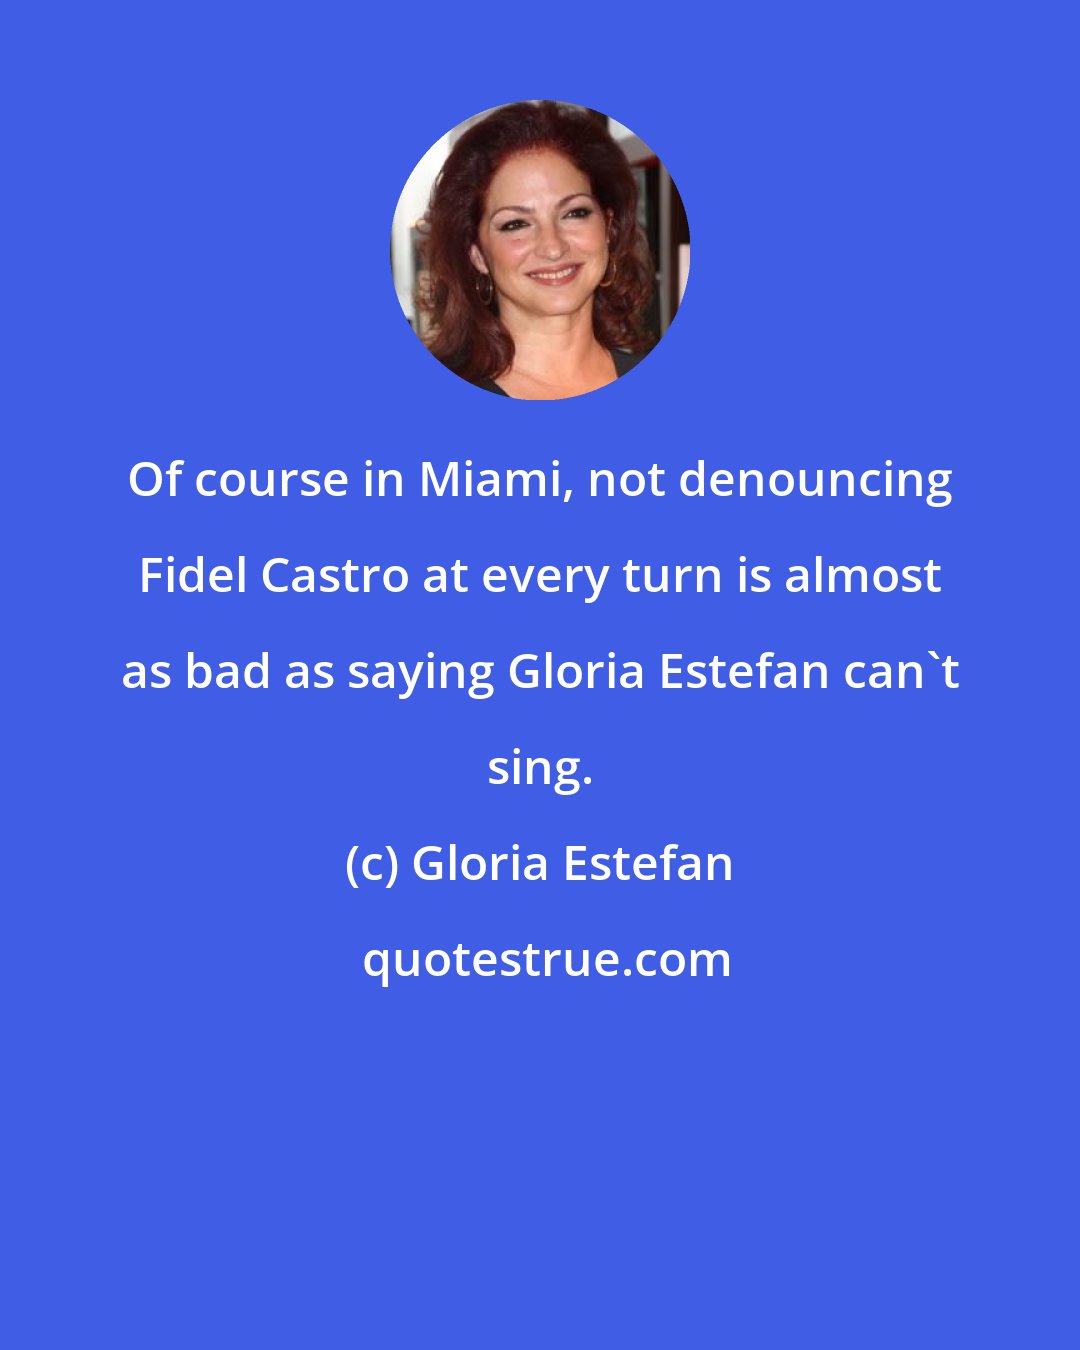 Gloria Estefan: Of course in Miami, not denouncing Fidel Castro at every turn is almost as bad as saying Gloria Estefan can't sing.